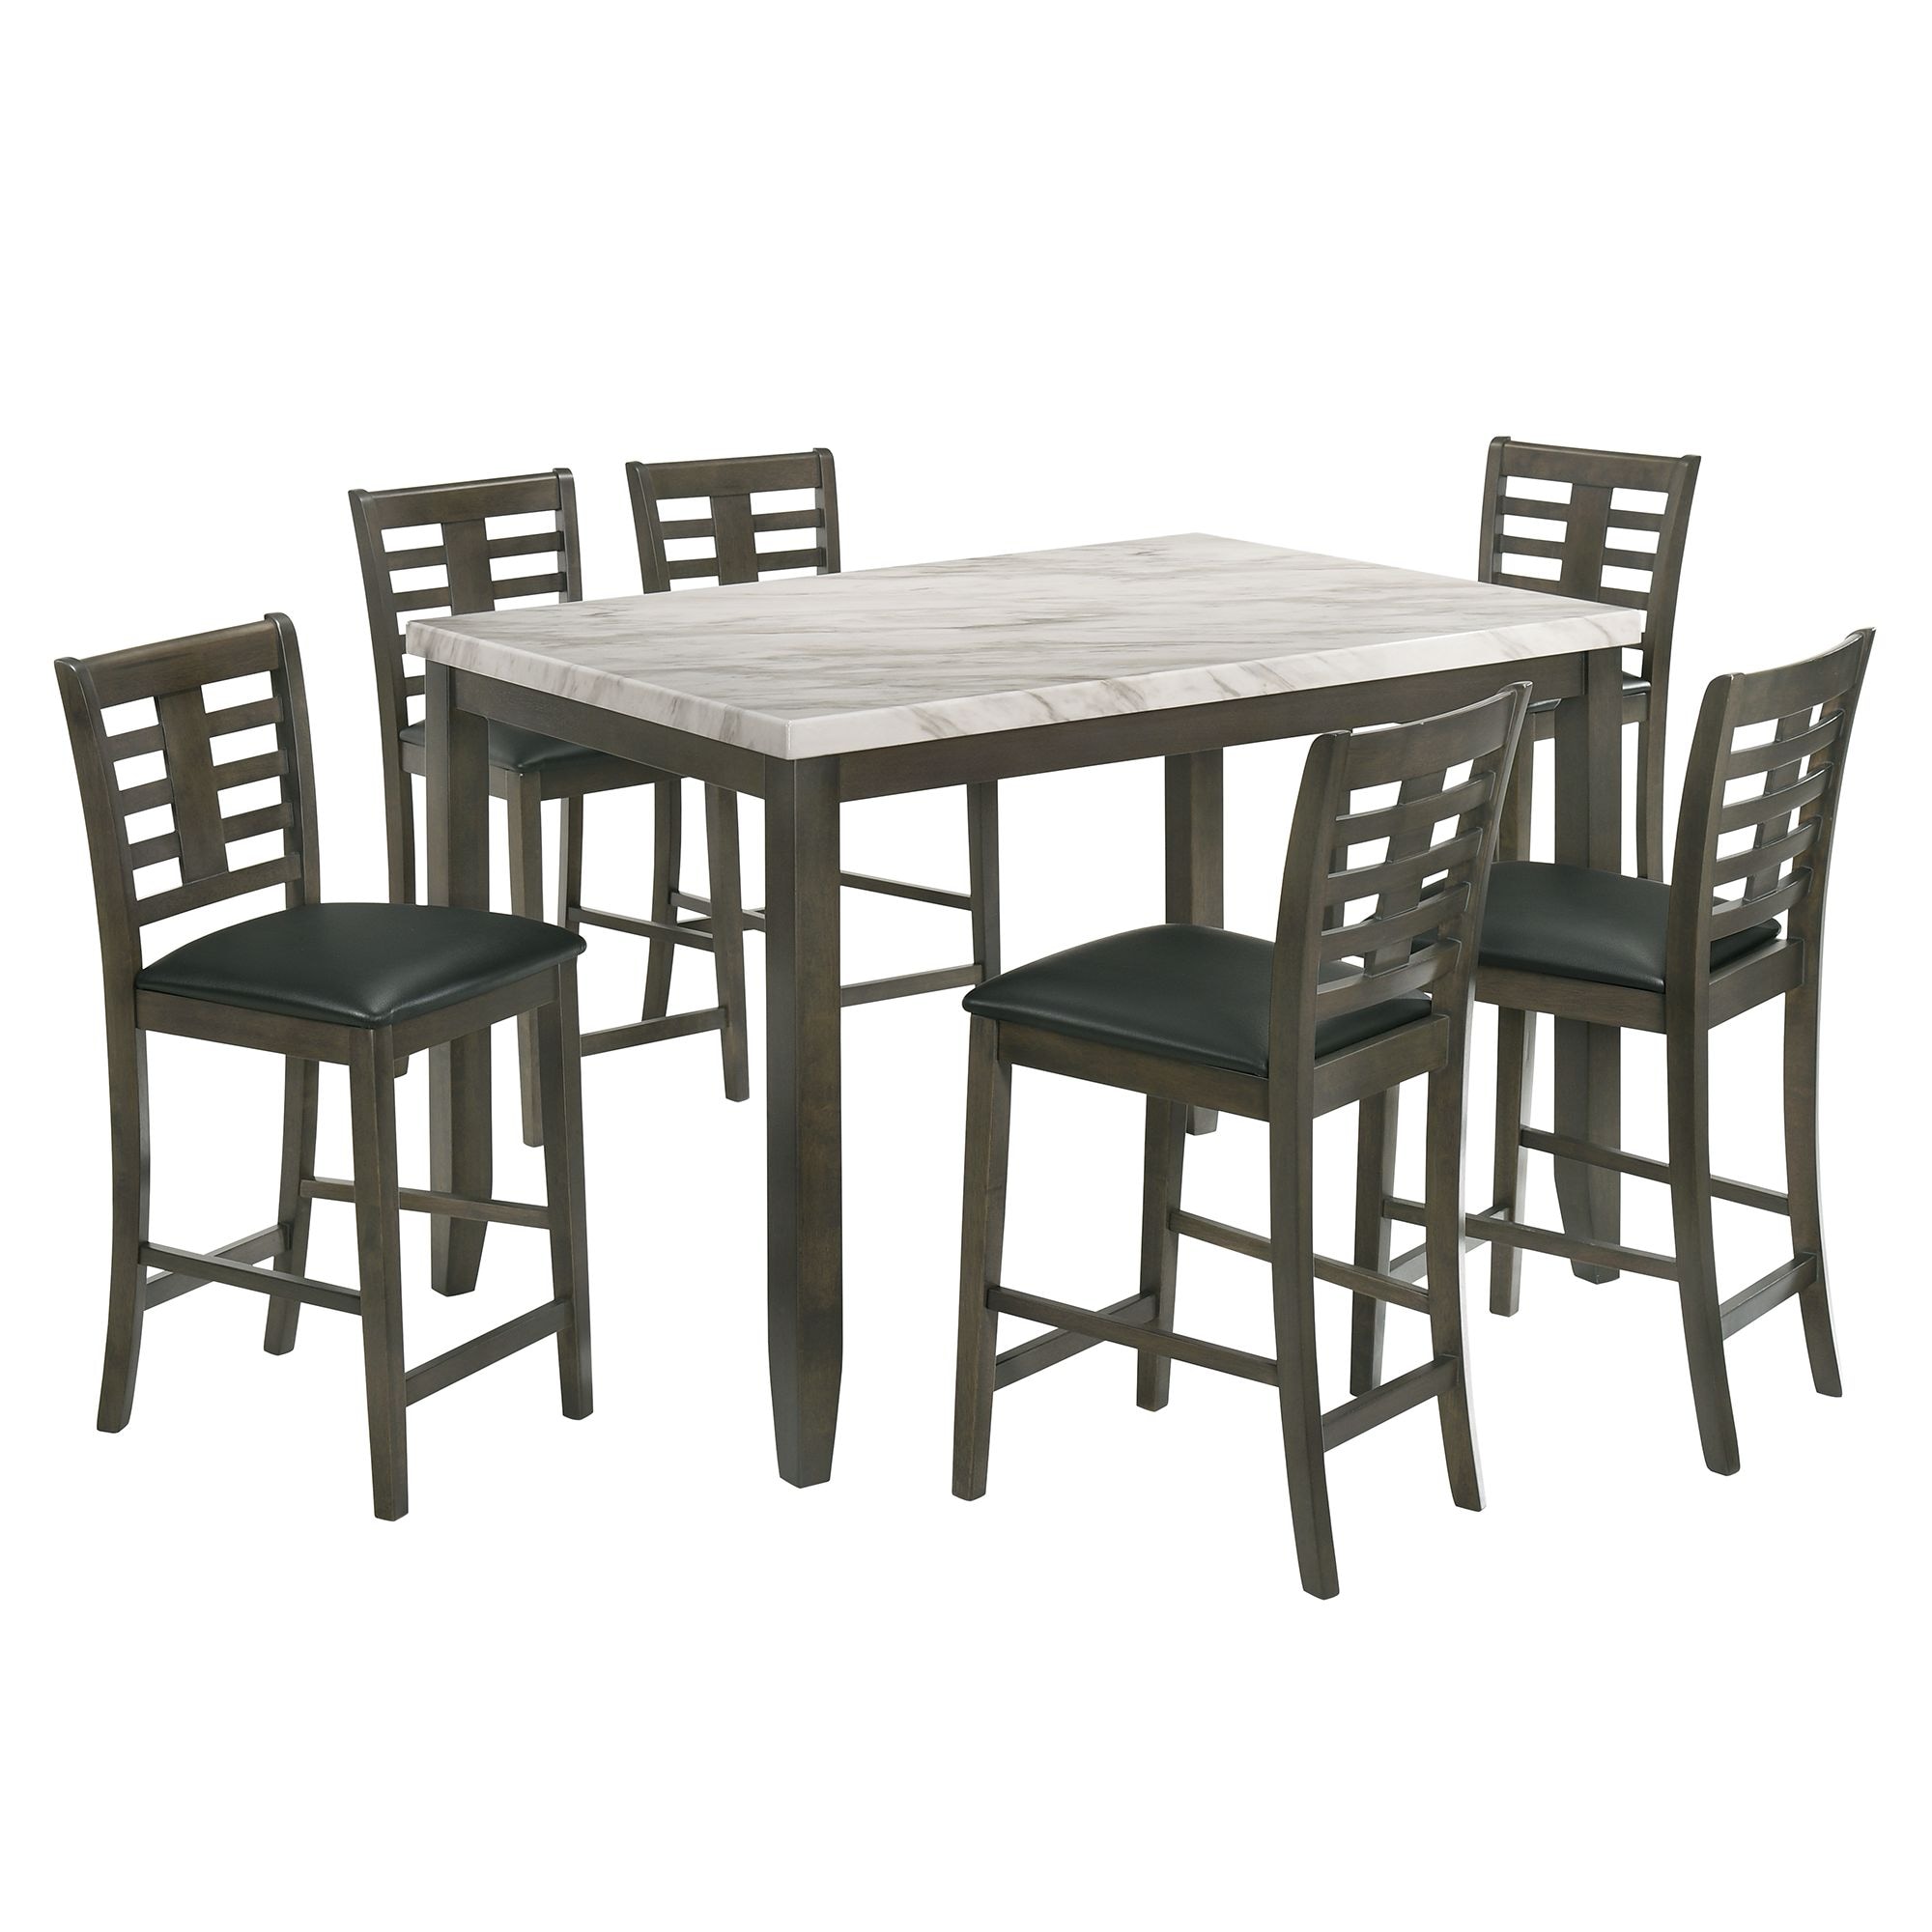 Nixon Dark Brown/White Transitional Dining Room Set with Rectangular Table (Seats 6) | - Picket House Furnishings DNS1007CS